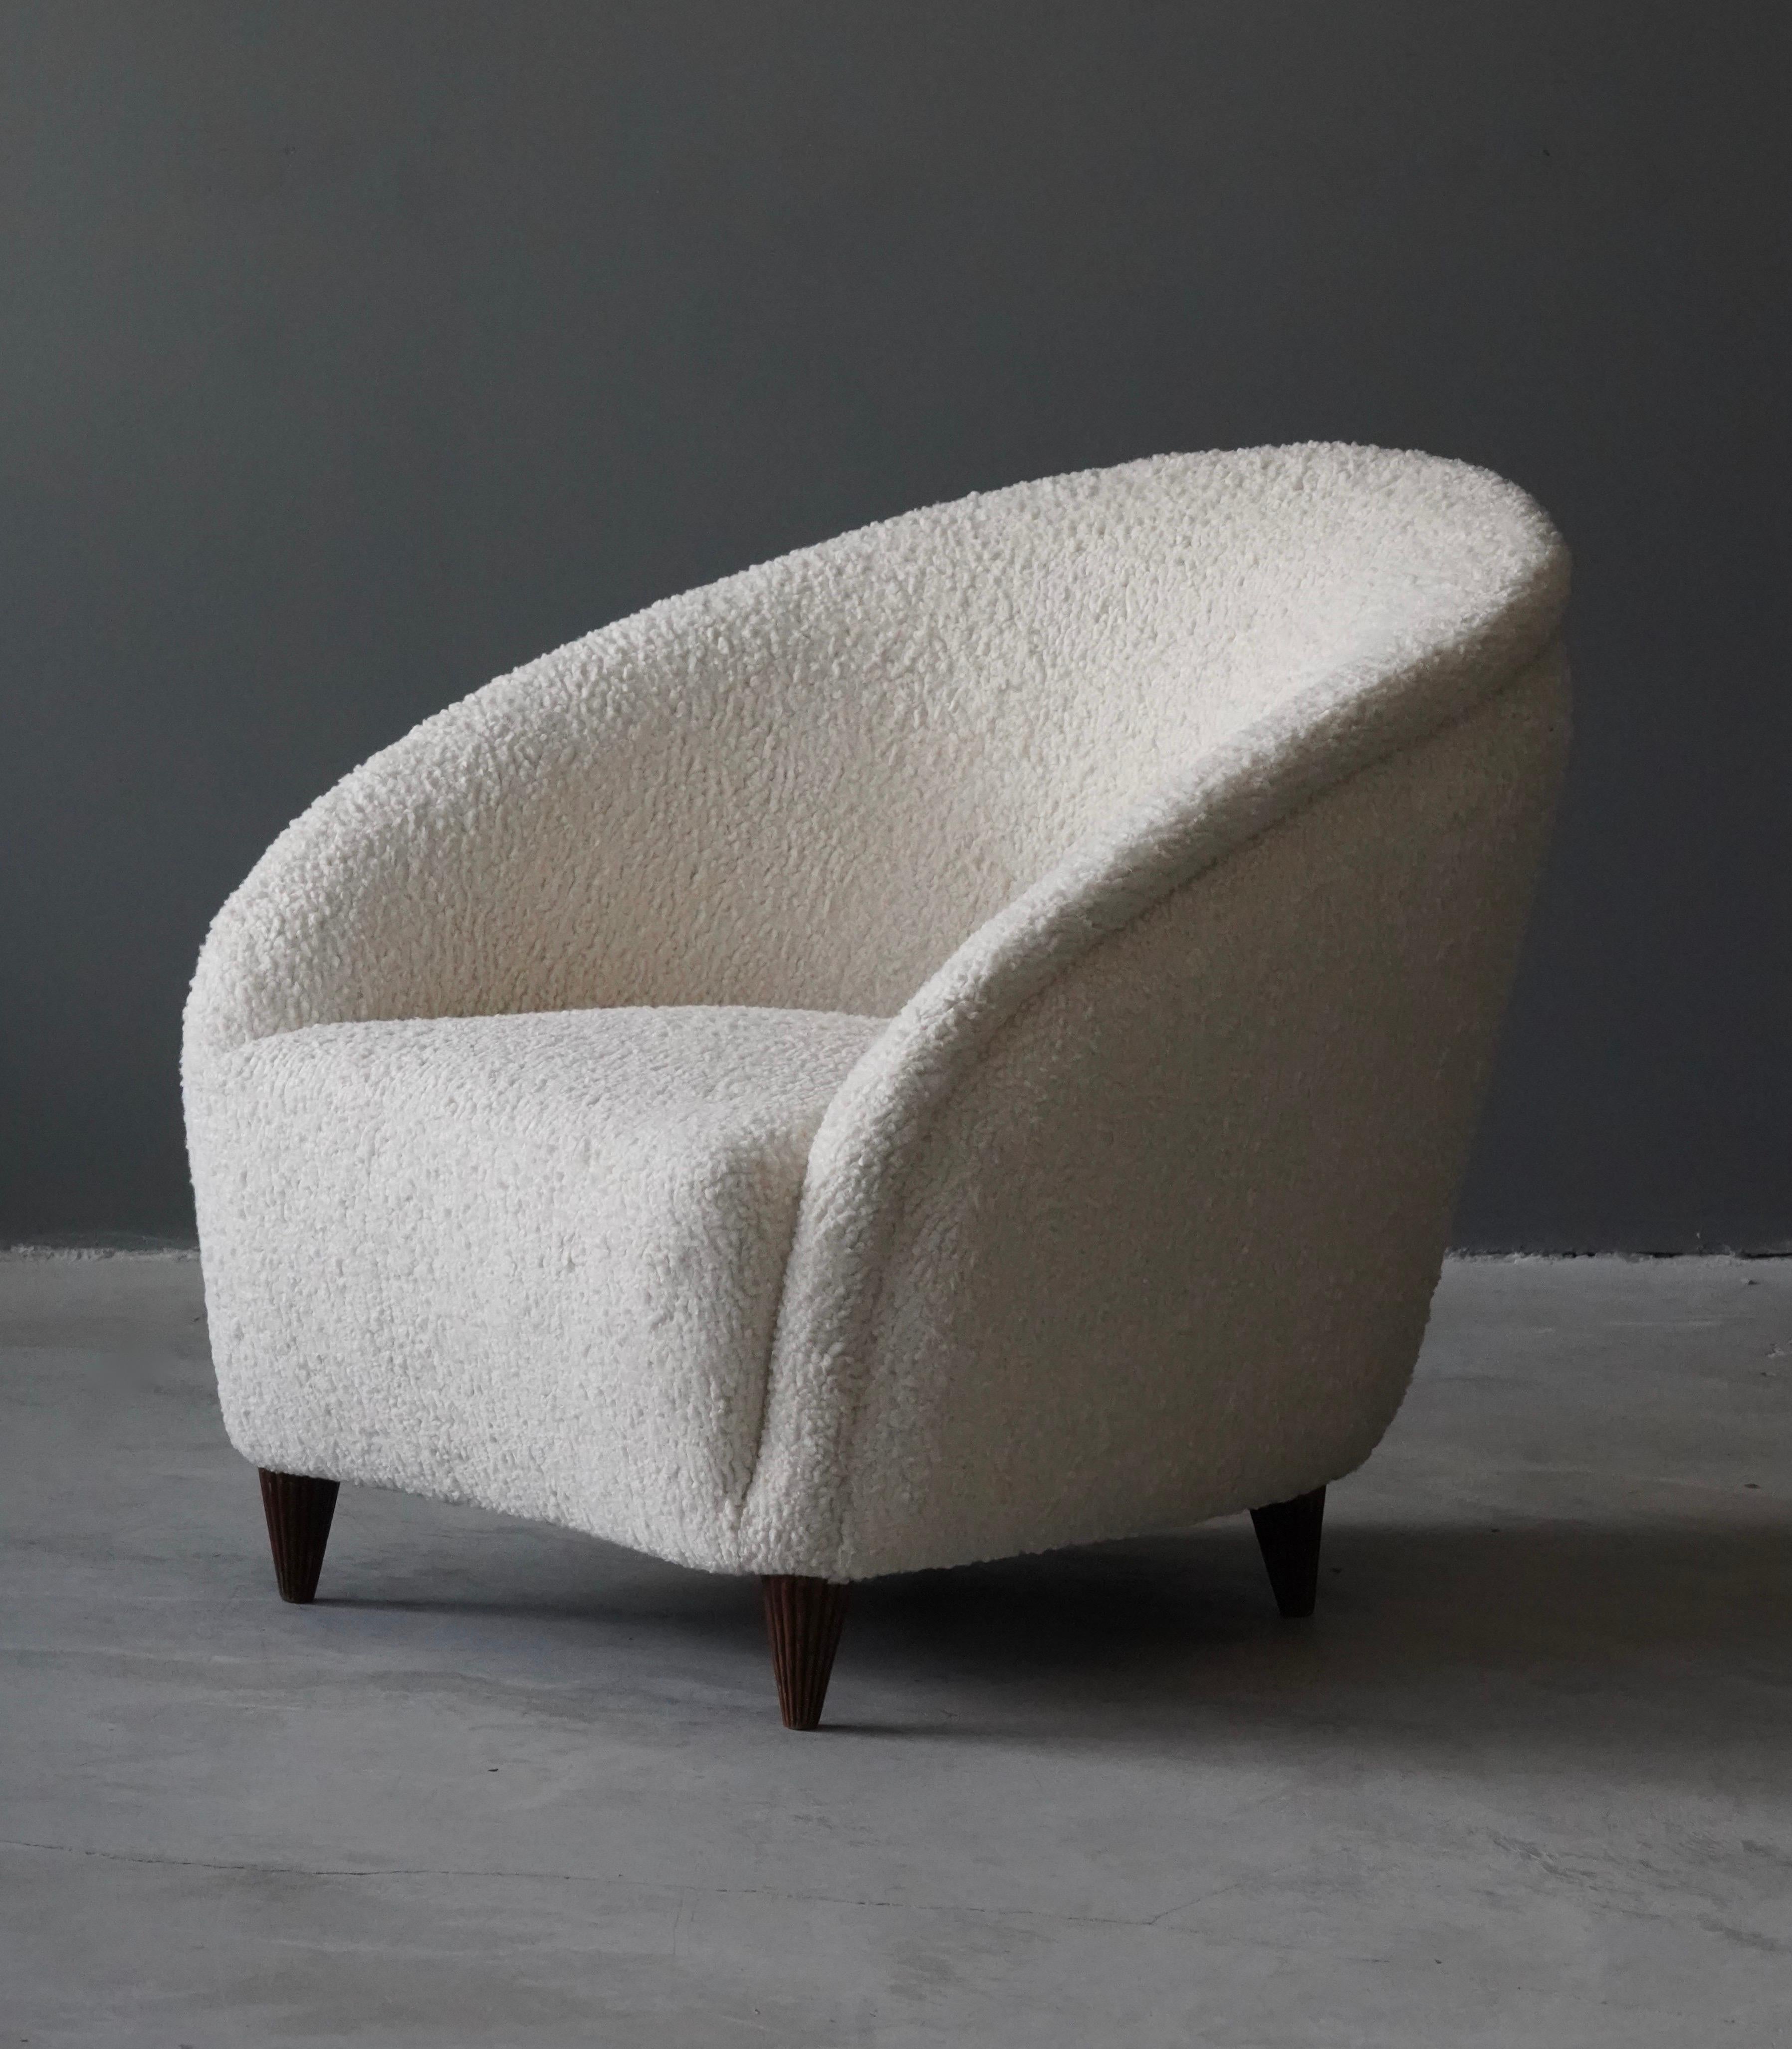 Organically shaped lounge chair of intimate scale, design attributed to Gio Ponti. Likely produced by Casa e Giardino in the 1940s. Reupholstered in a high-end white bouclé fabric. Fluted walnut legs with light original patina. 

Gio Ponti is